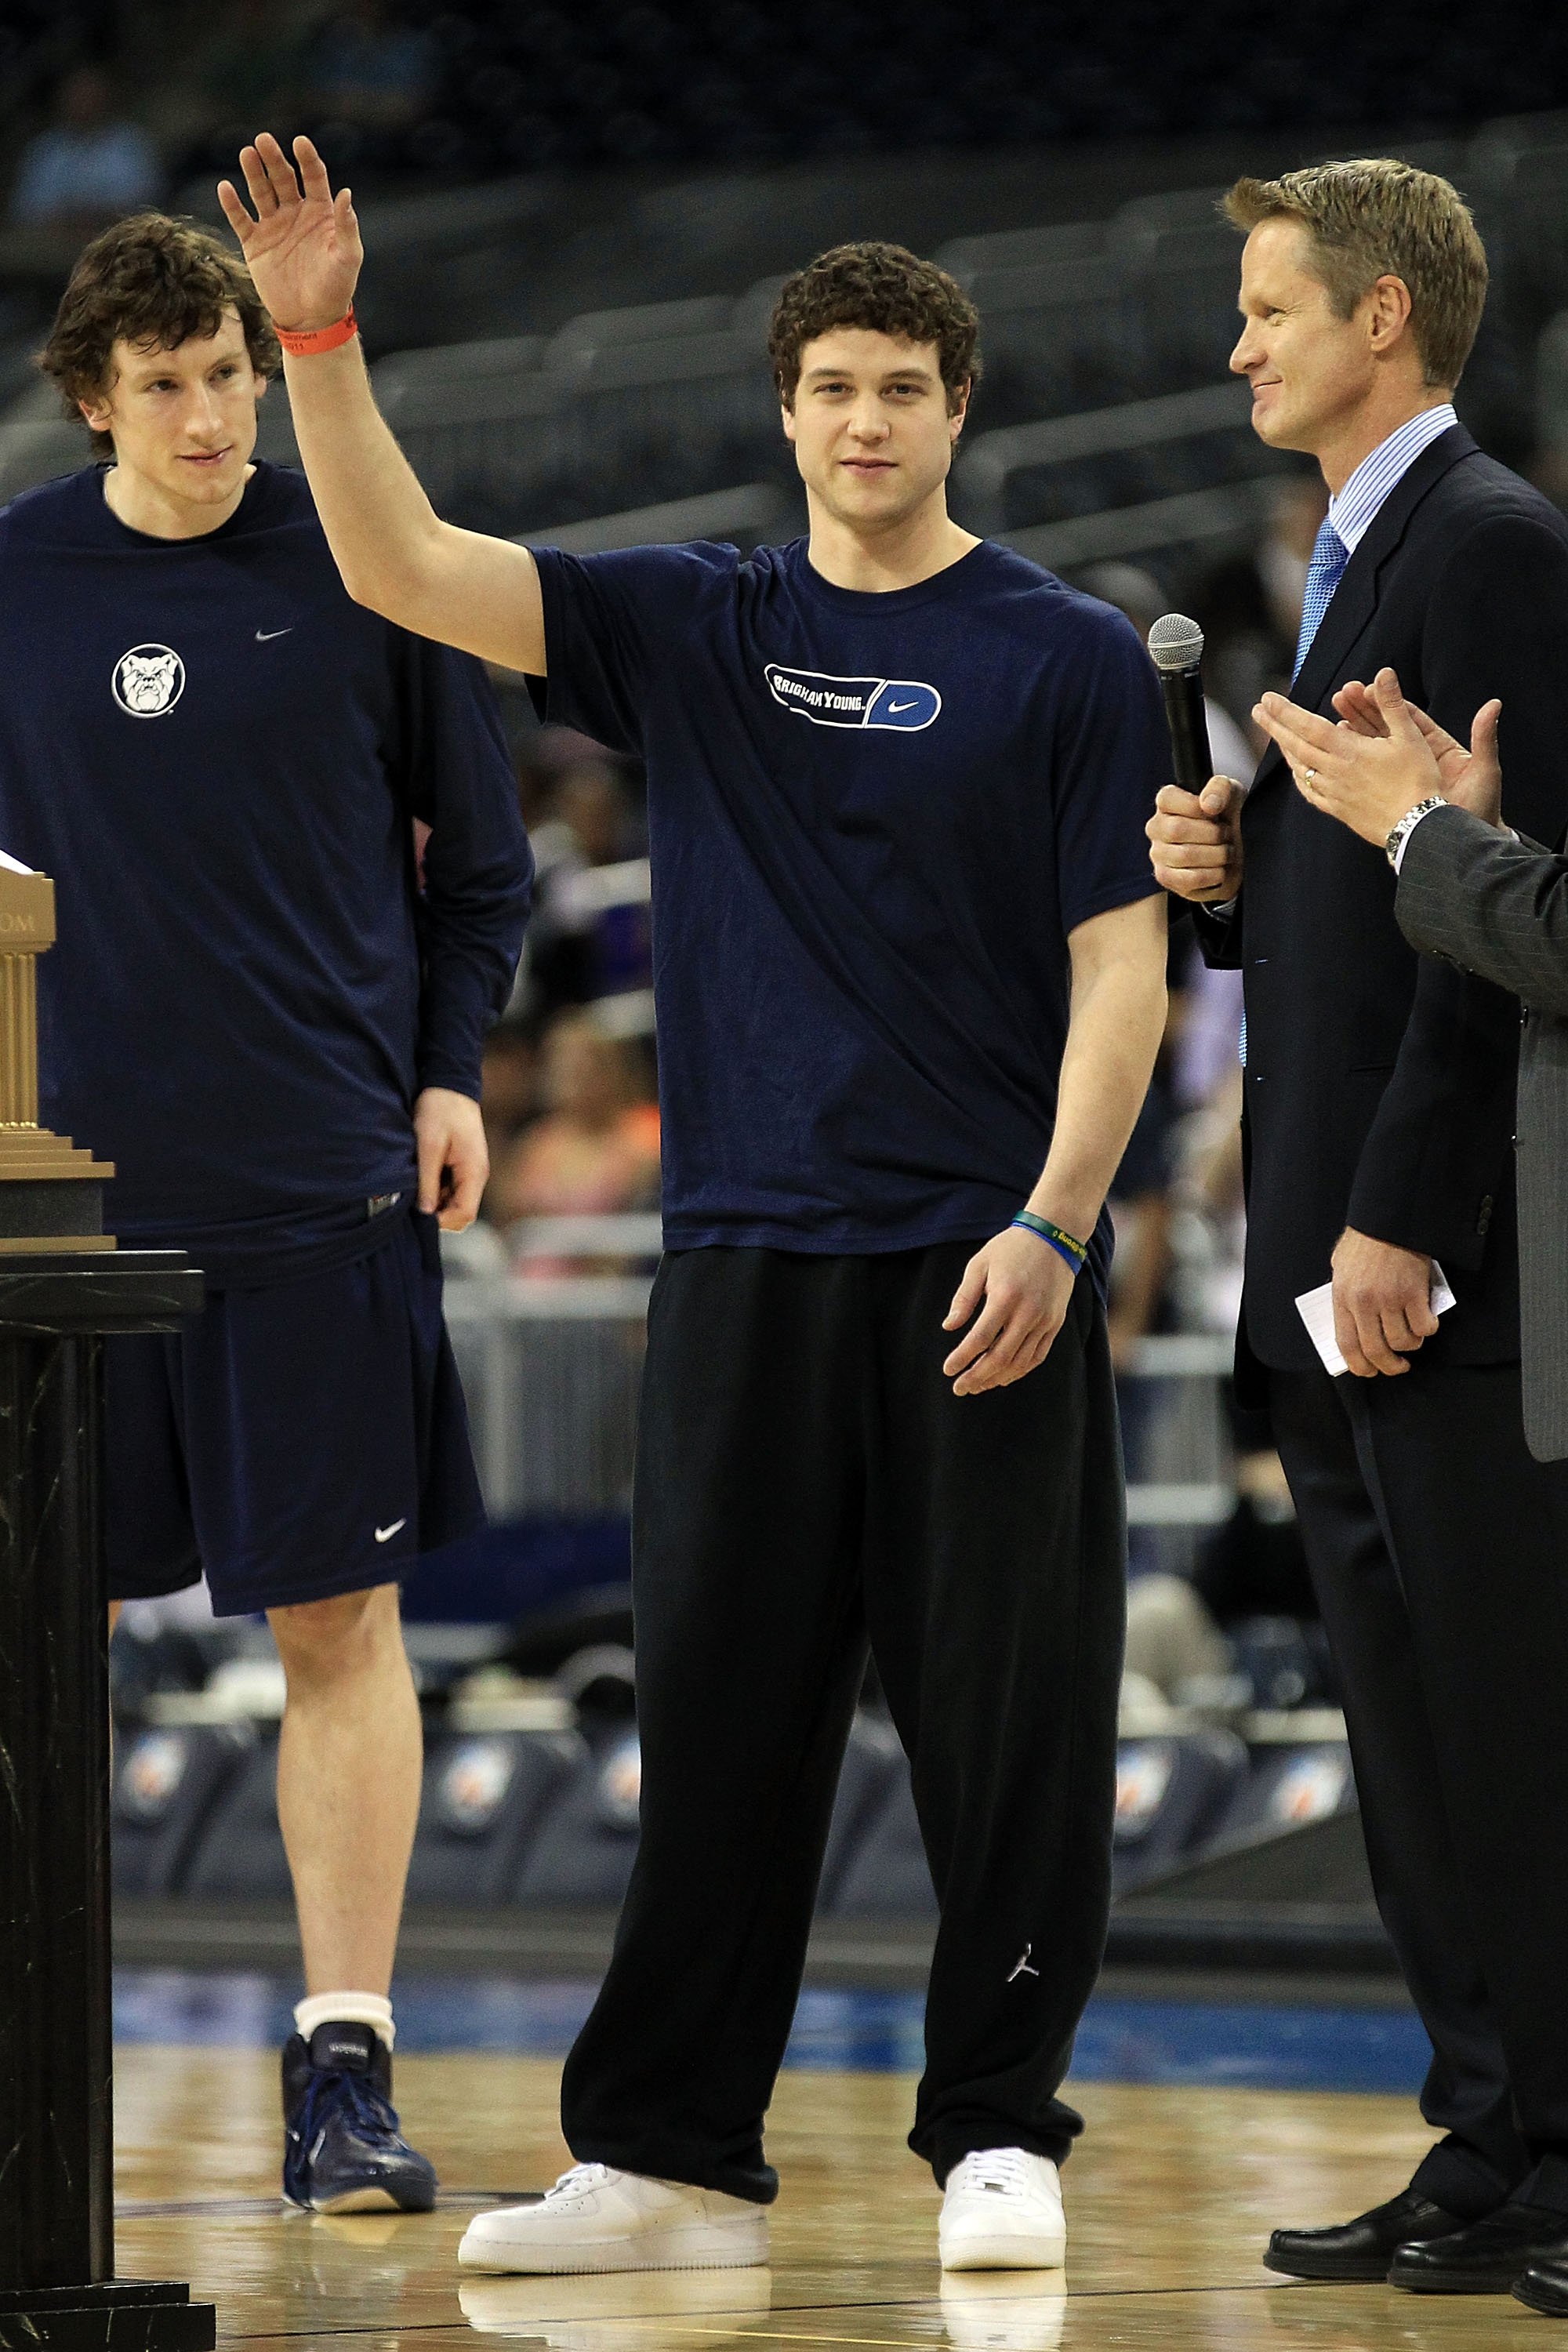 HOUSTON, TX - APRIL 01:  Jimmer Fredette of BYU is named the most outstanding senior student-athlete as it broadcaster Steve Kerr presents him with the award during practice prior to the 2011 Final Four of the NCAA Division I Men's Basketball Tournament a